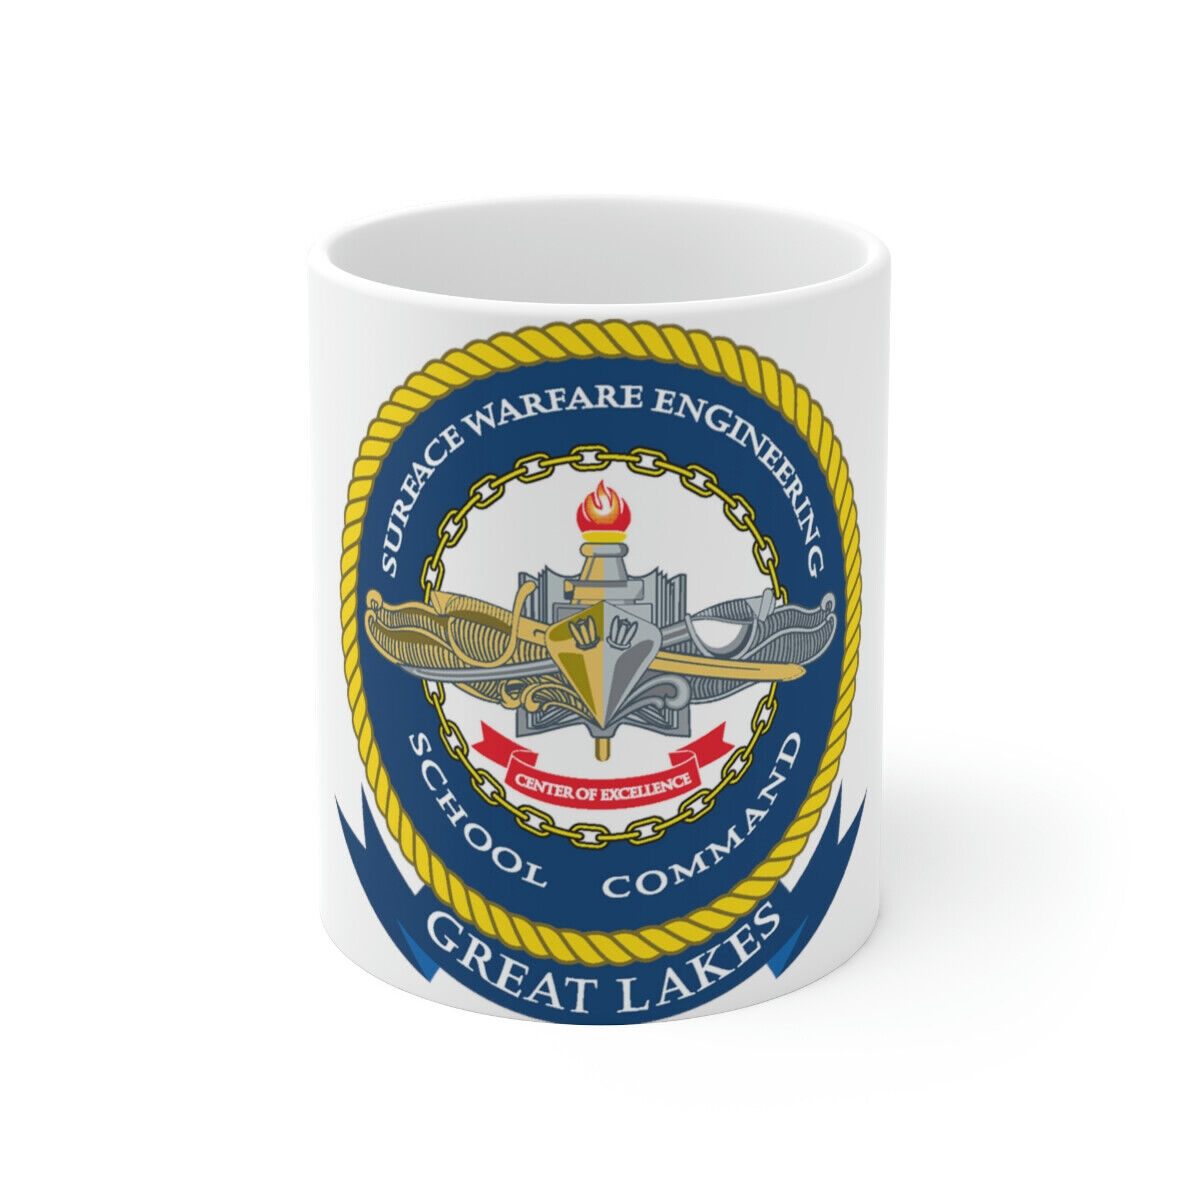 SWESC Great Lakes (U.S. Navy) White Coffee Cup 11oz